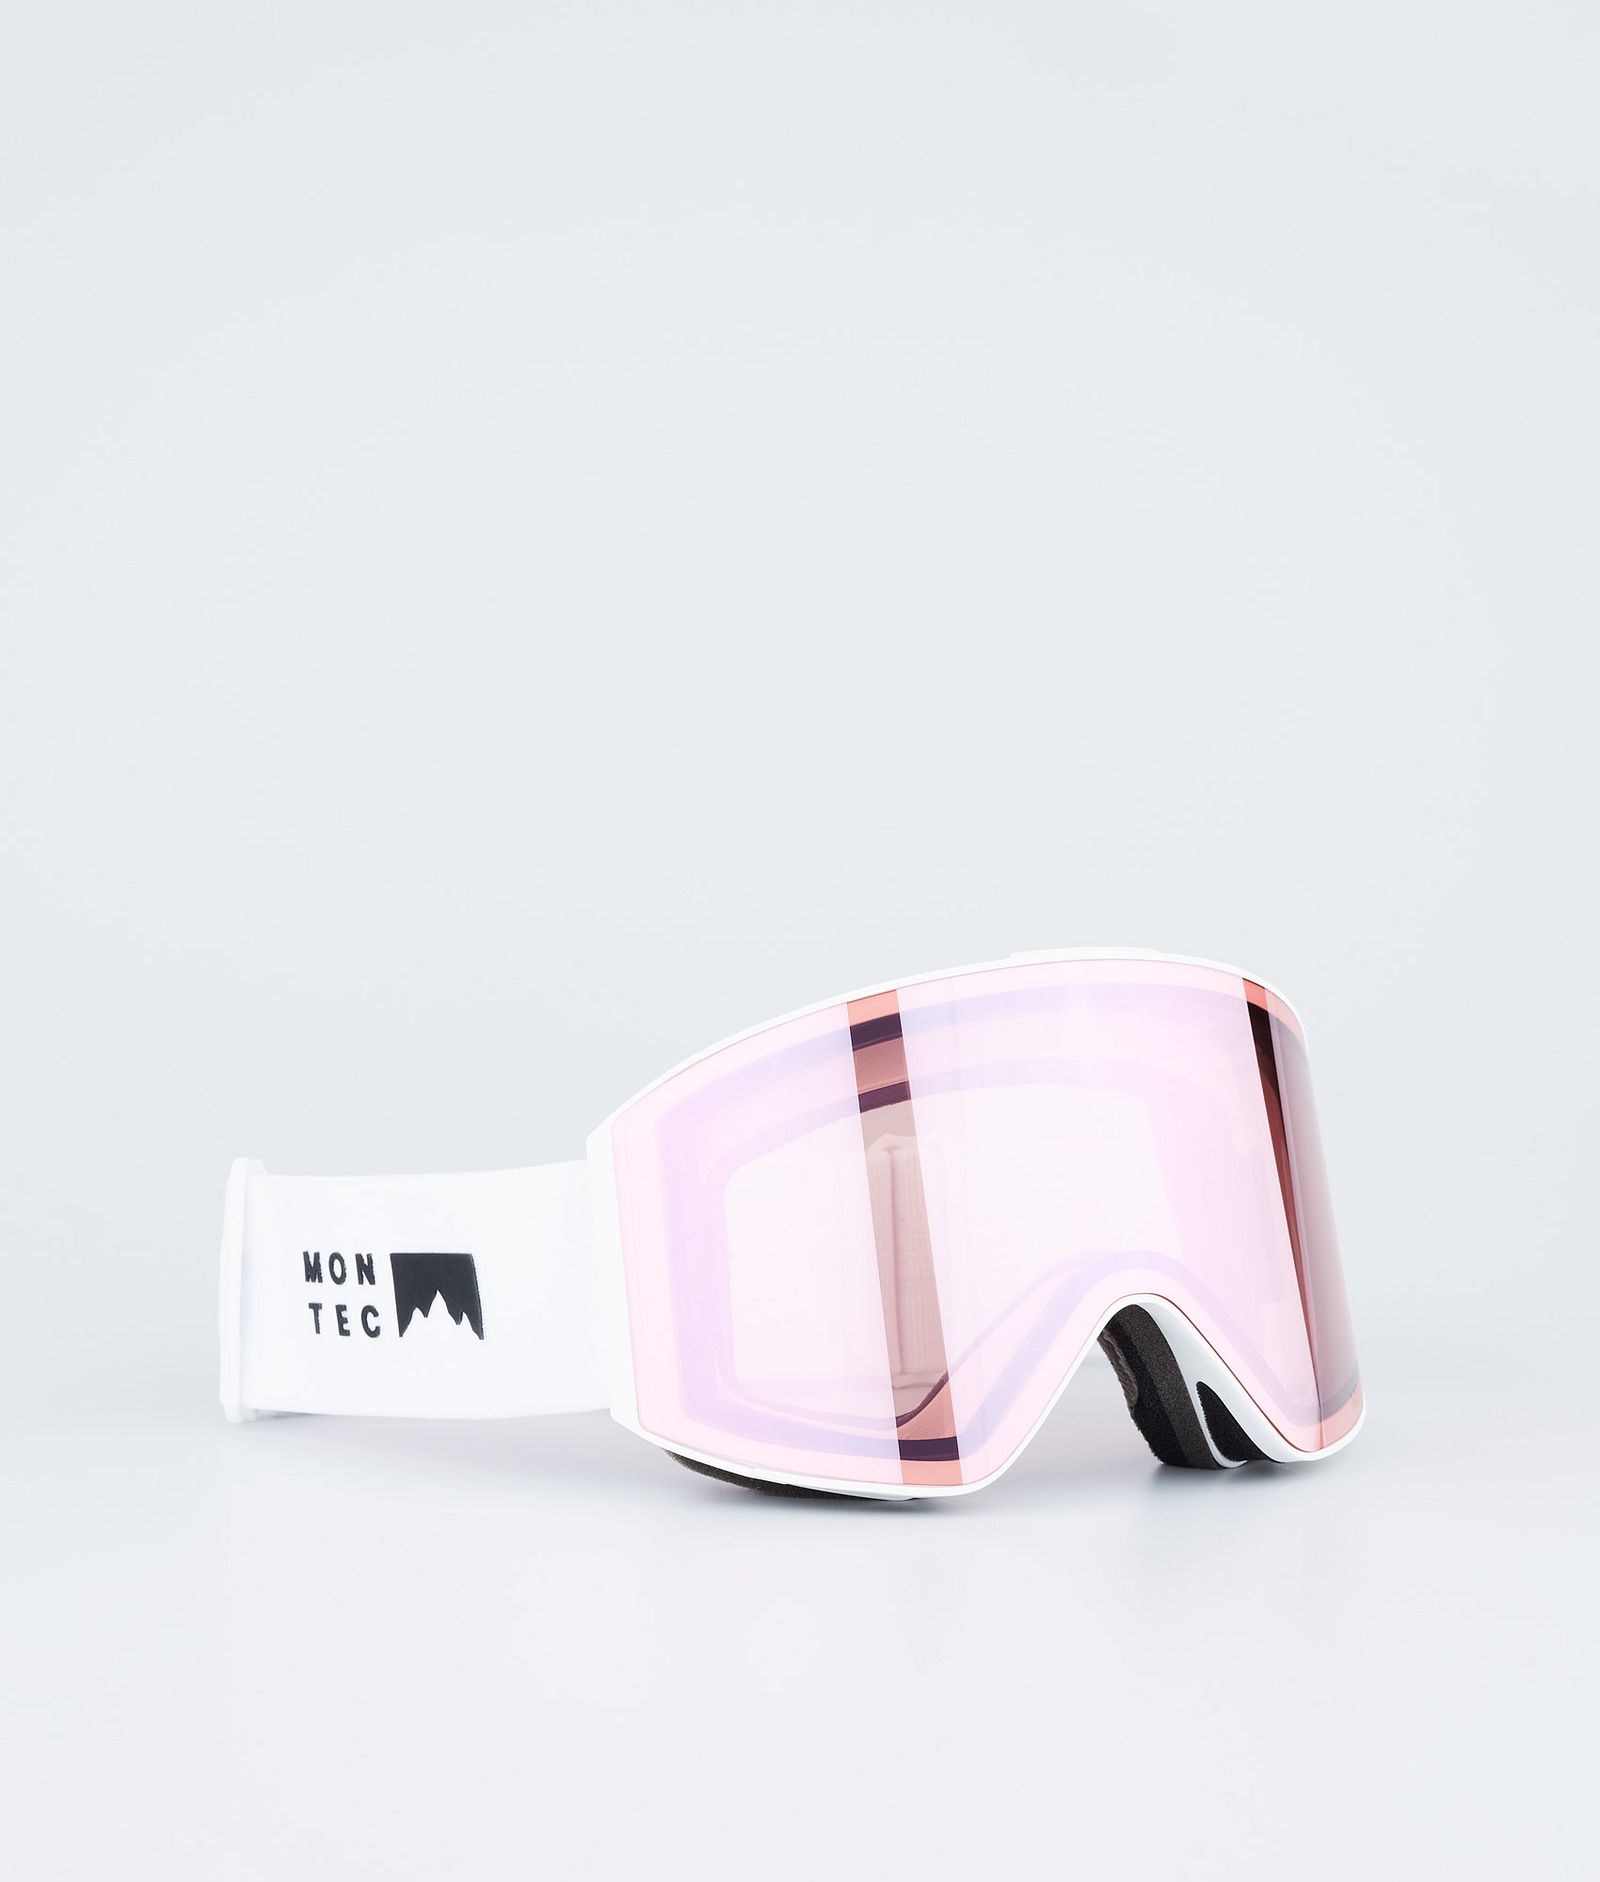 Scope Goggle Lens Extralins Snow Pink Sapphire Mirror